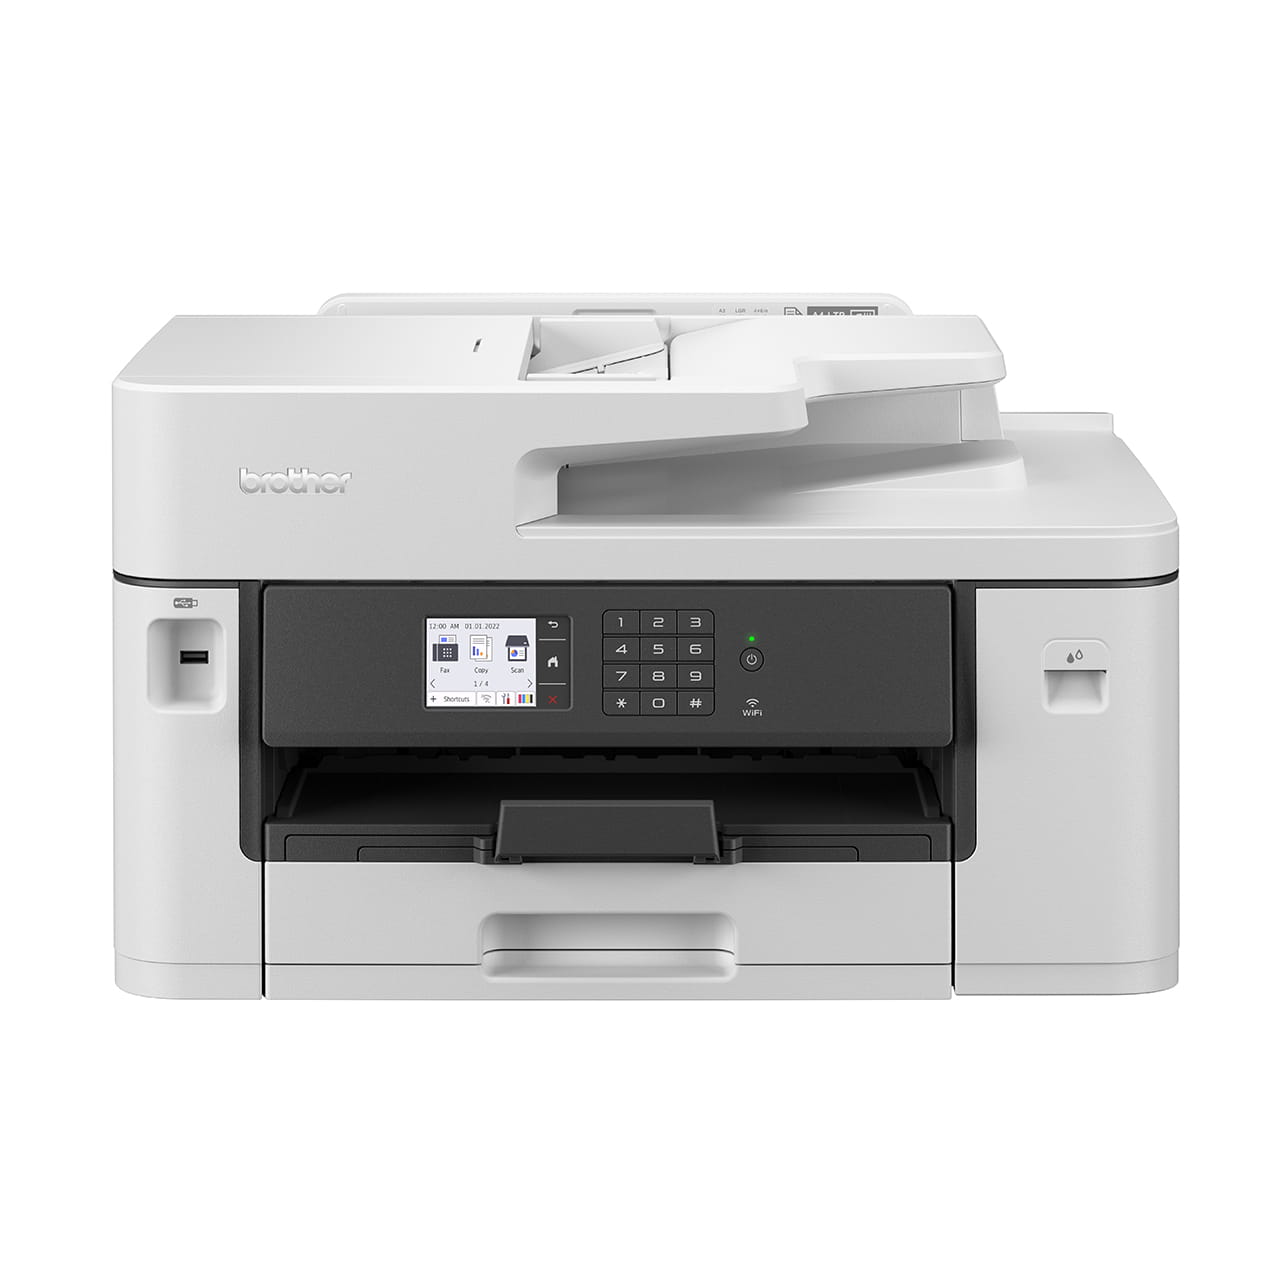 Brother MFC-J2340DW Inkjet Printer Front View